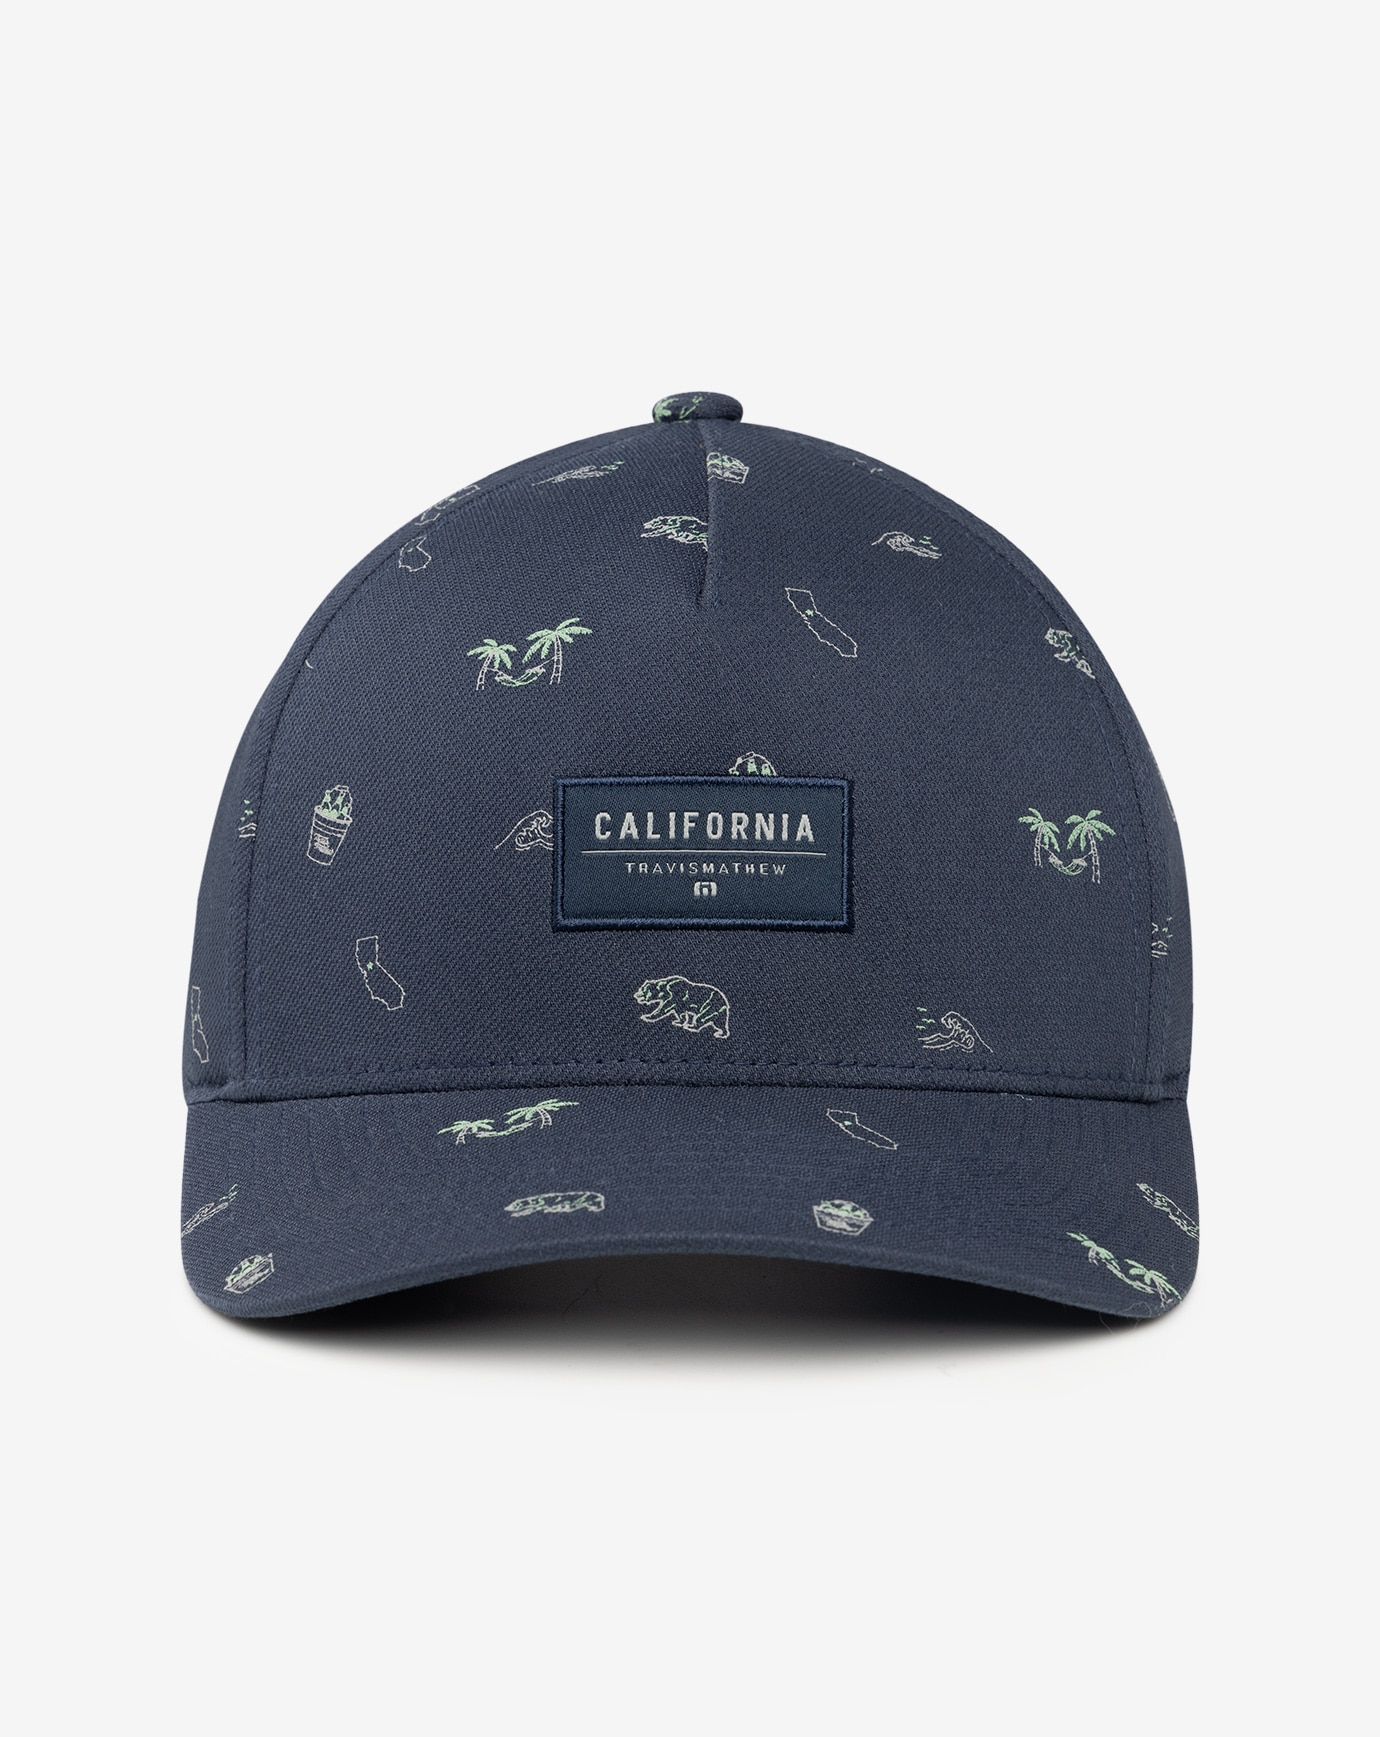 Related Product - SAUSALITO SNAPBACK HAT